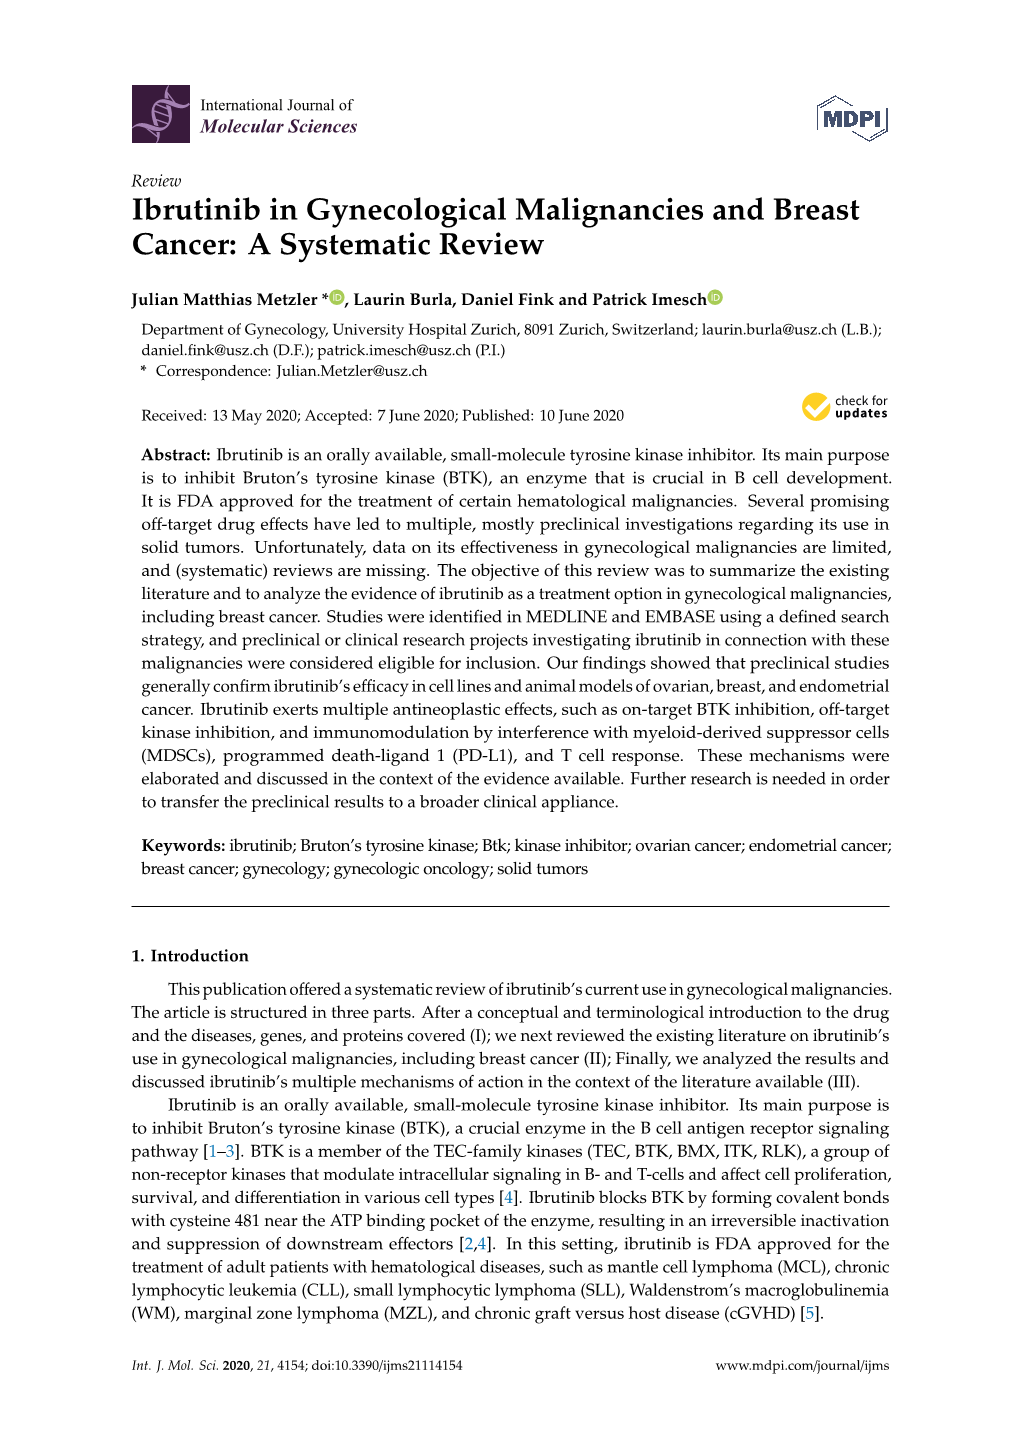 Ibrutinib in Gynecological Malignancies and Breast Cancer: a Systematic Review